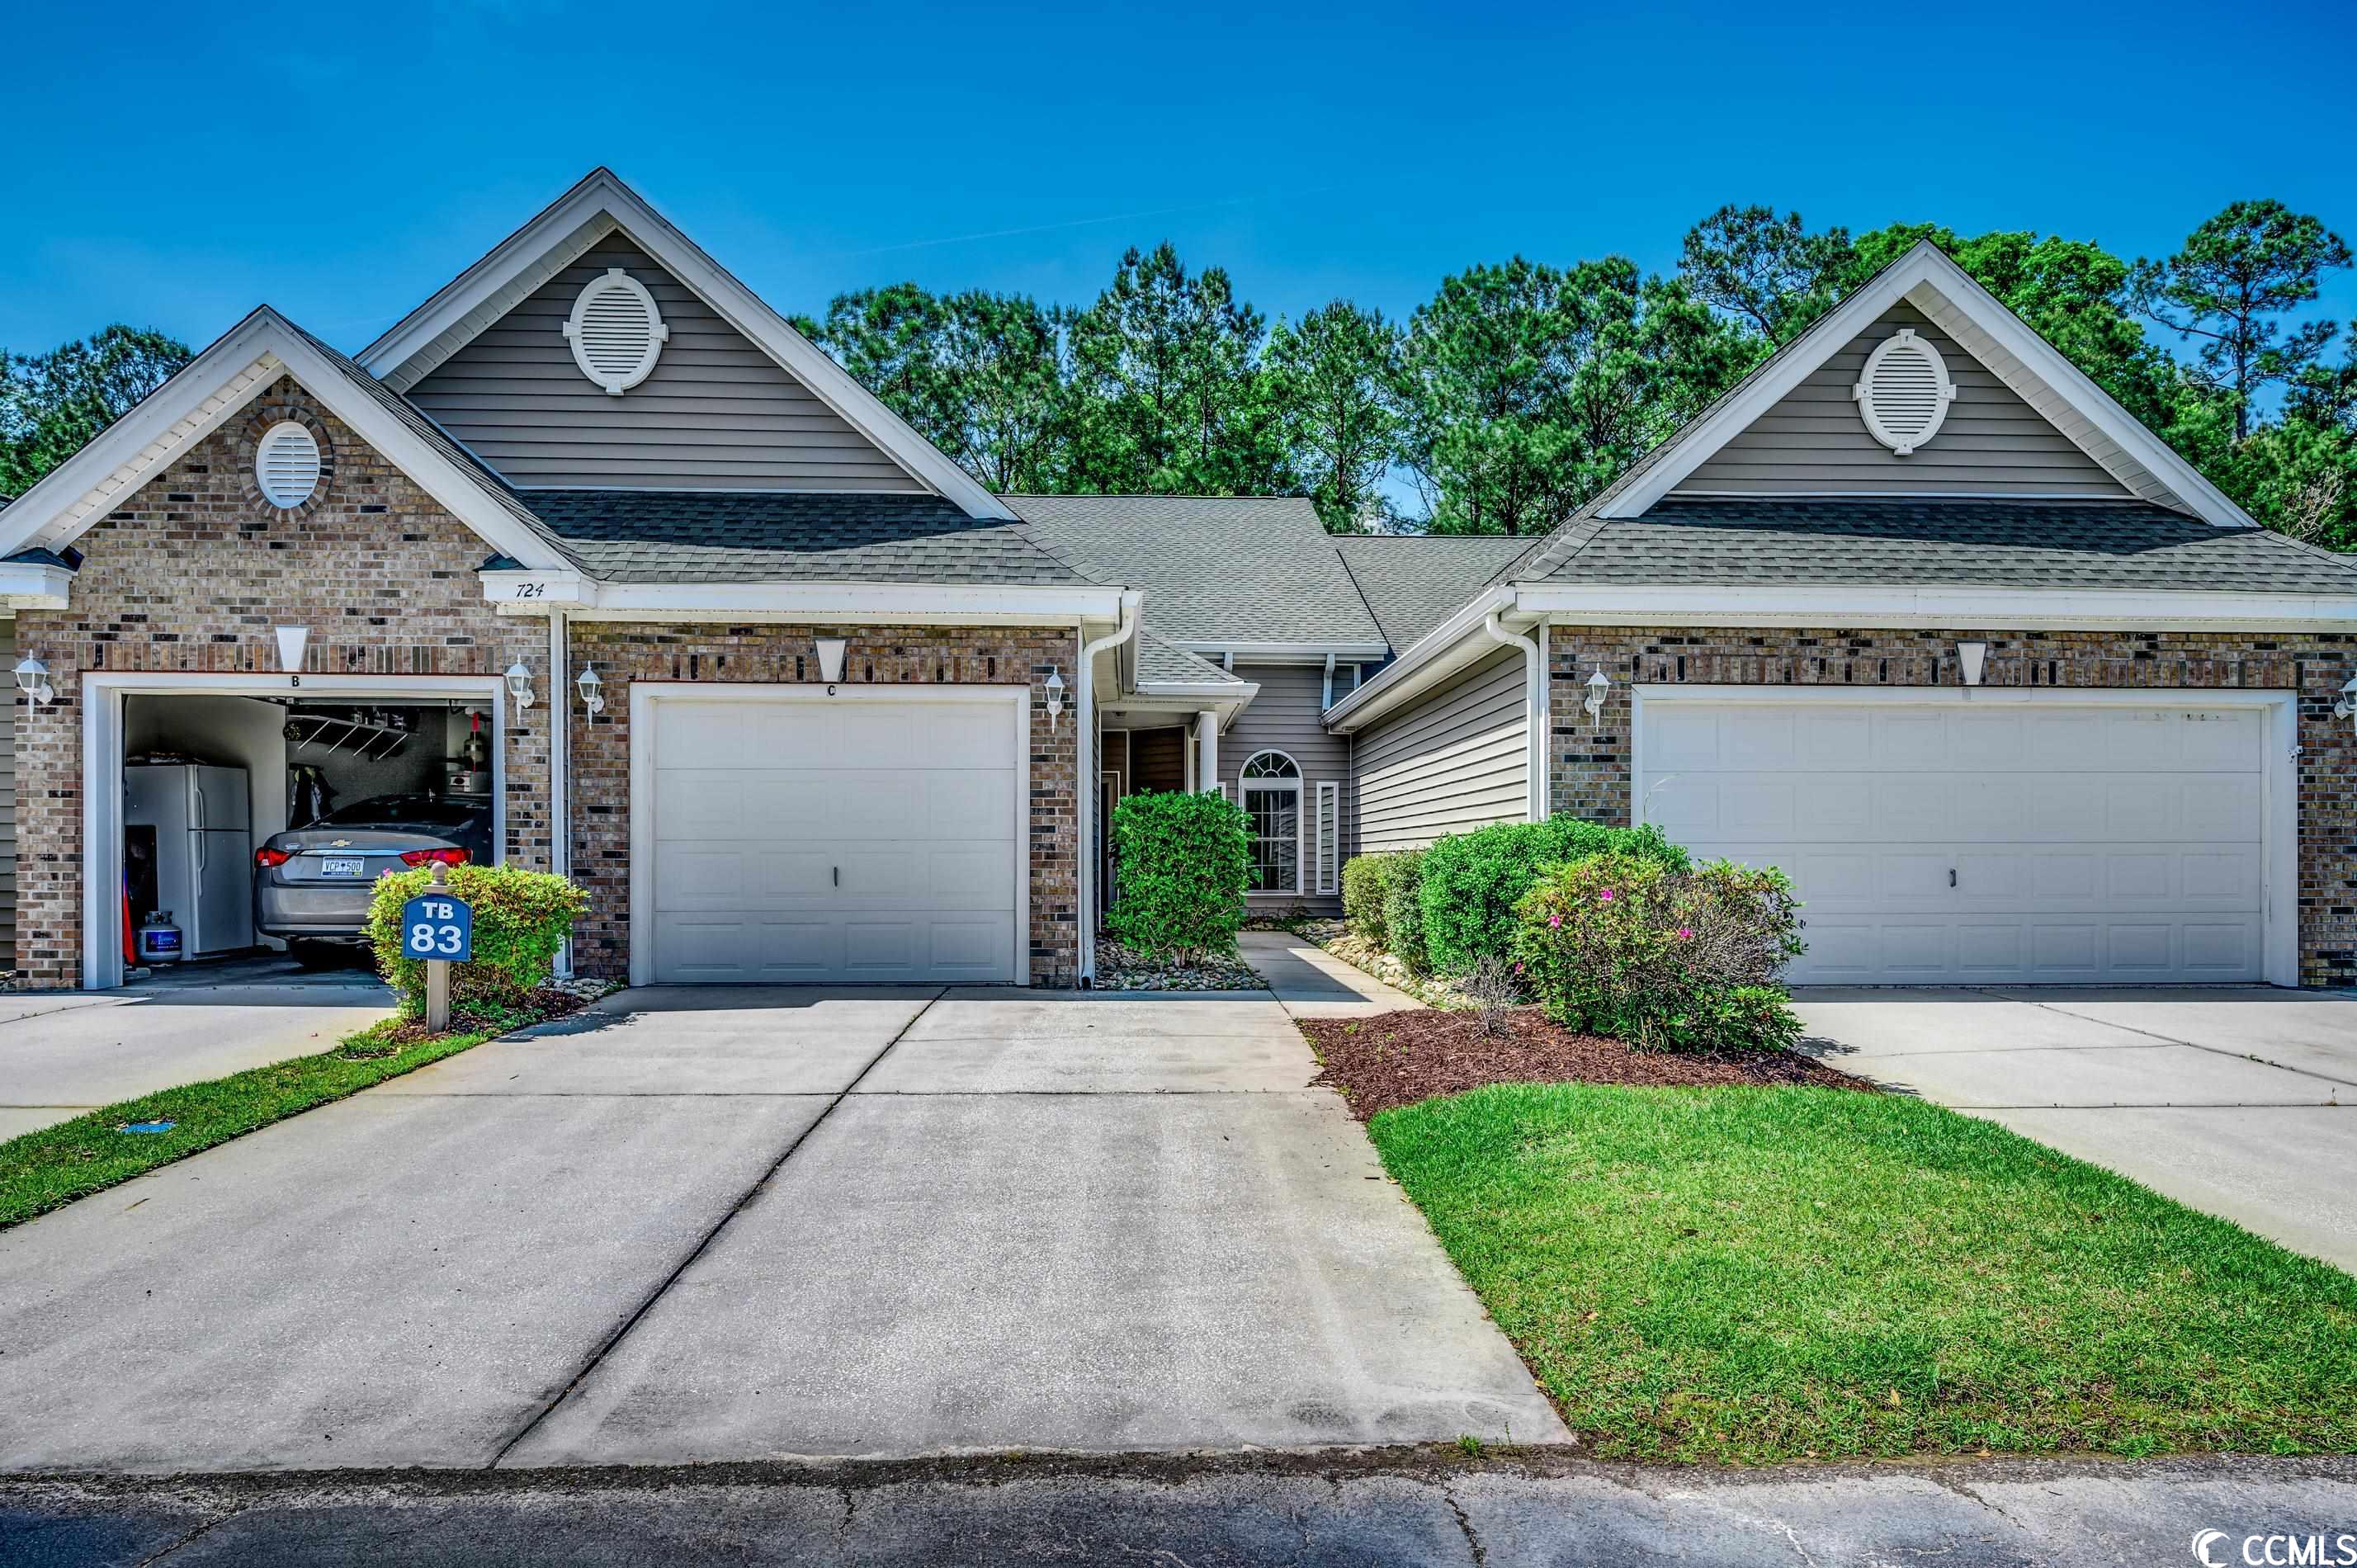 now is your chance to see this one-level garden townhome in the highly sought-after golf course community of true blue in pawleys island. the well-designed floor plan is open and spacious with vaulted ceilings and solar tubes in the great room. there is also a formal dining room that is perfect for entertaining guests! additionally, the master suite and second bedroom are located on the main floor. the spacious kitchen offers a breakfast nook, work island, breakfast bar and pantry. the 11' x 8' screened porch and patio area offer an opportunity for peace and quiet while you enjoy your beautiful property. there is also a laundry closet with a full-size washer and dryer, plus a brand-new hvac system was just installed! this home also has a large private one-car garage with pull-down stairs to the attic. the true blue community has a premier golf course along with a restaurant and a pro shop in the clubhouse.  located in the center of pawleys island, the community offers close proximity to the beach, the intracoastal waterway and tons of incredible restaurants and shops. homeowners are able to enjoy the community pools, hot tubs and tennis courts. book your showing today!